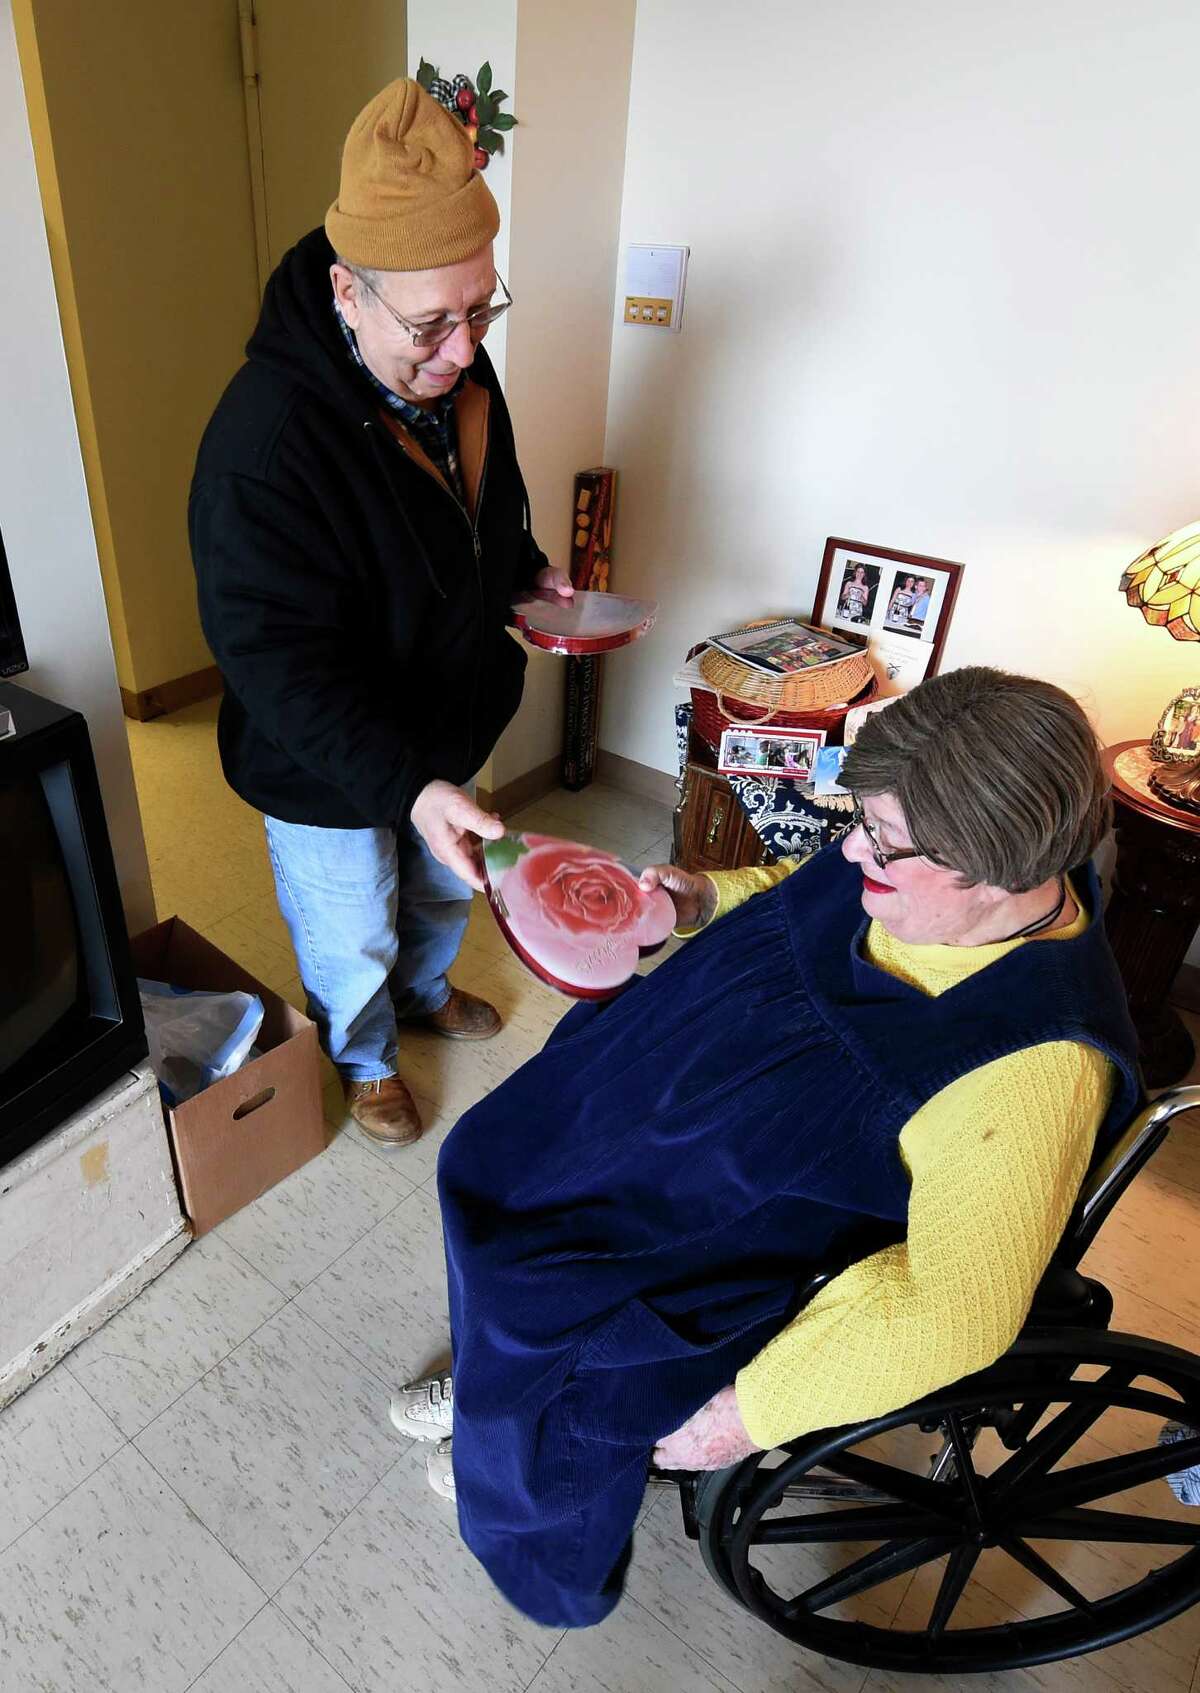 Meals on Wheels driver Joe Marcello Jr. makes a delivery to Marlene Straus at the Ohav Shalom apartments Friday Feb. 12, 2016 in Albany, N.Y. (Skip Dickstein/Times Union)